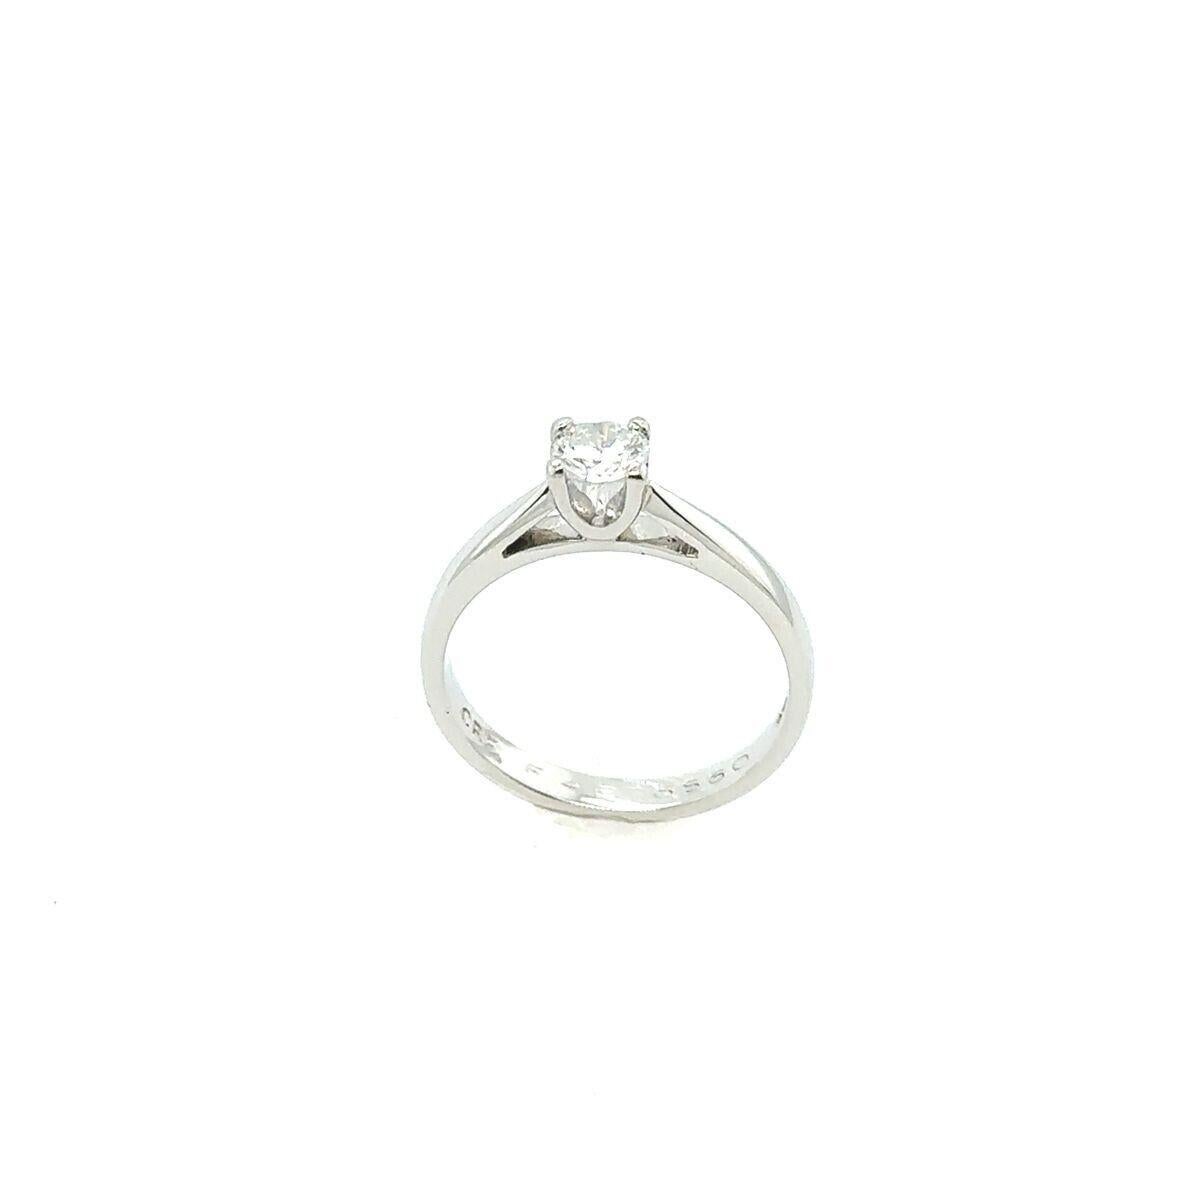 This elegant Diamond ring is made to perfection. The solitaire Diamond ring is set on a four-claw Platinum band and is perfect for the bride-to-be who wants a small and elegant ring.

Additional Information: 
Total Diamond Weight: 0.28ct
Diamond